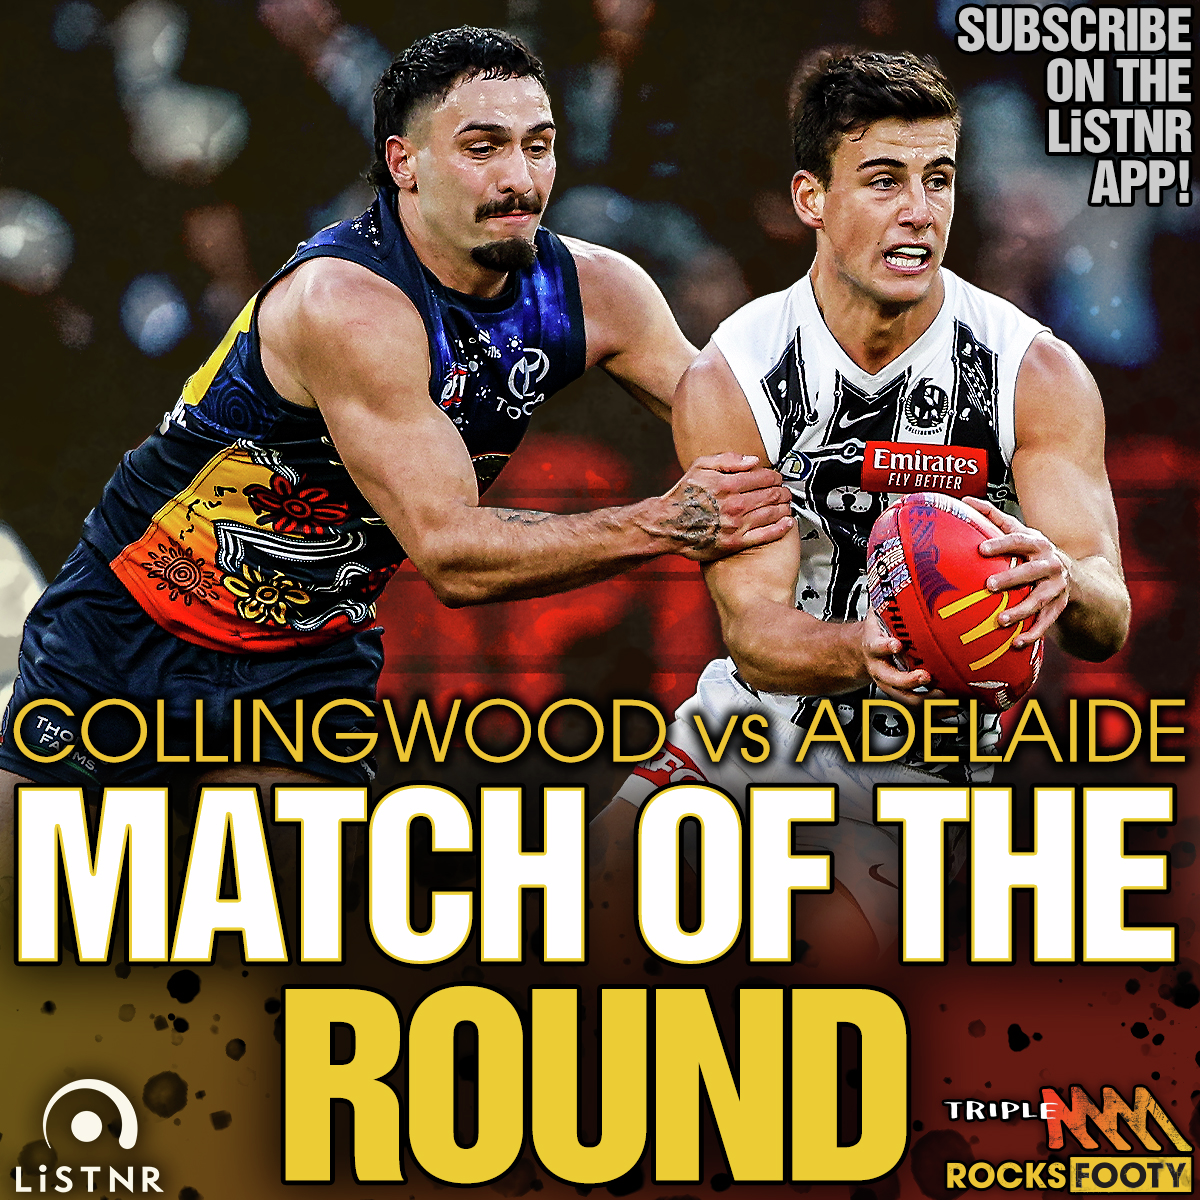 MONDAY MINI-MATCH | Another Collingwood v Adelaide thriller